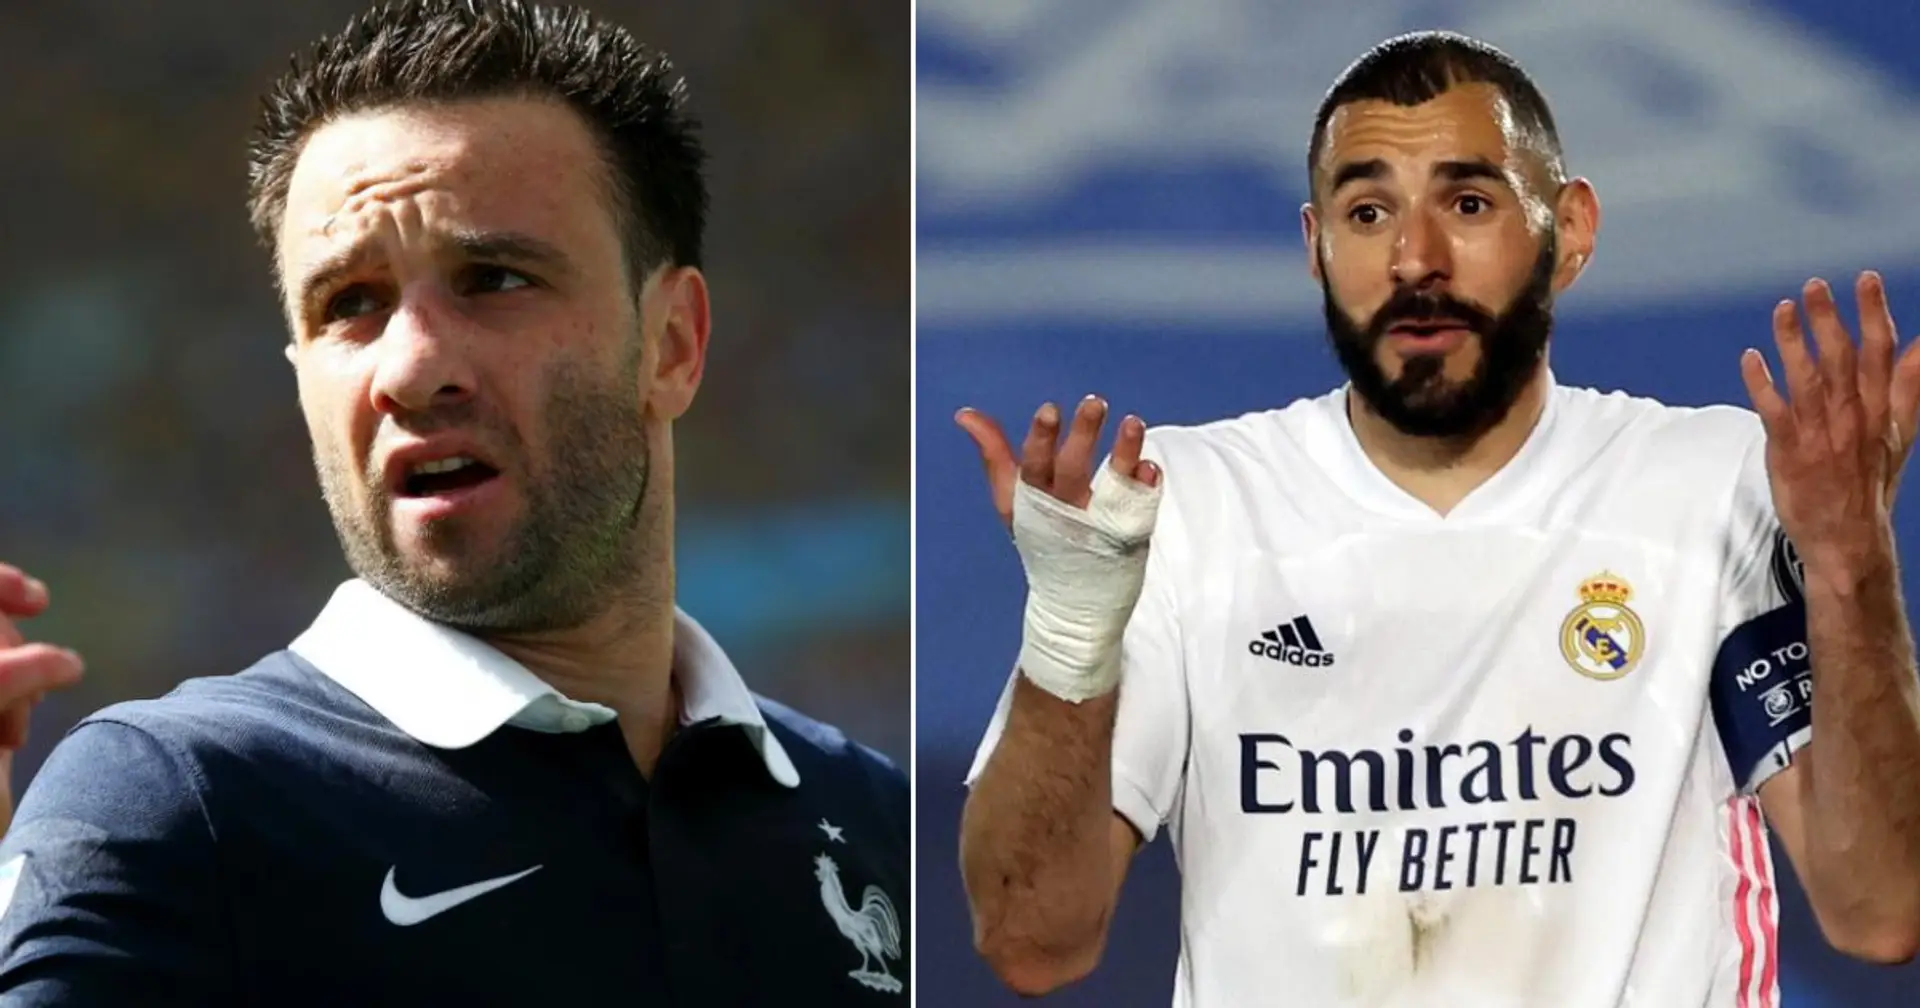 JUST IN: Benzema set to appear in criminal court over sex tape scandal